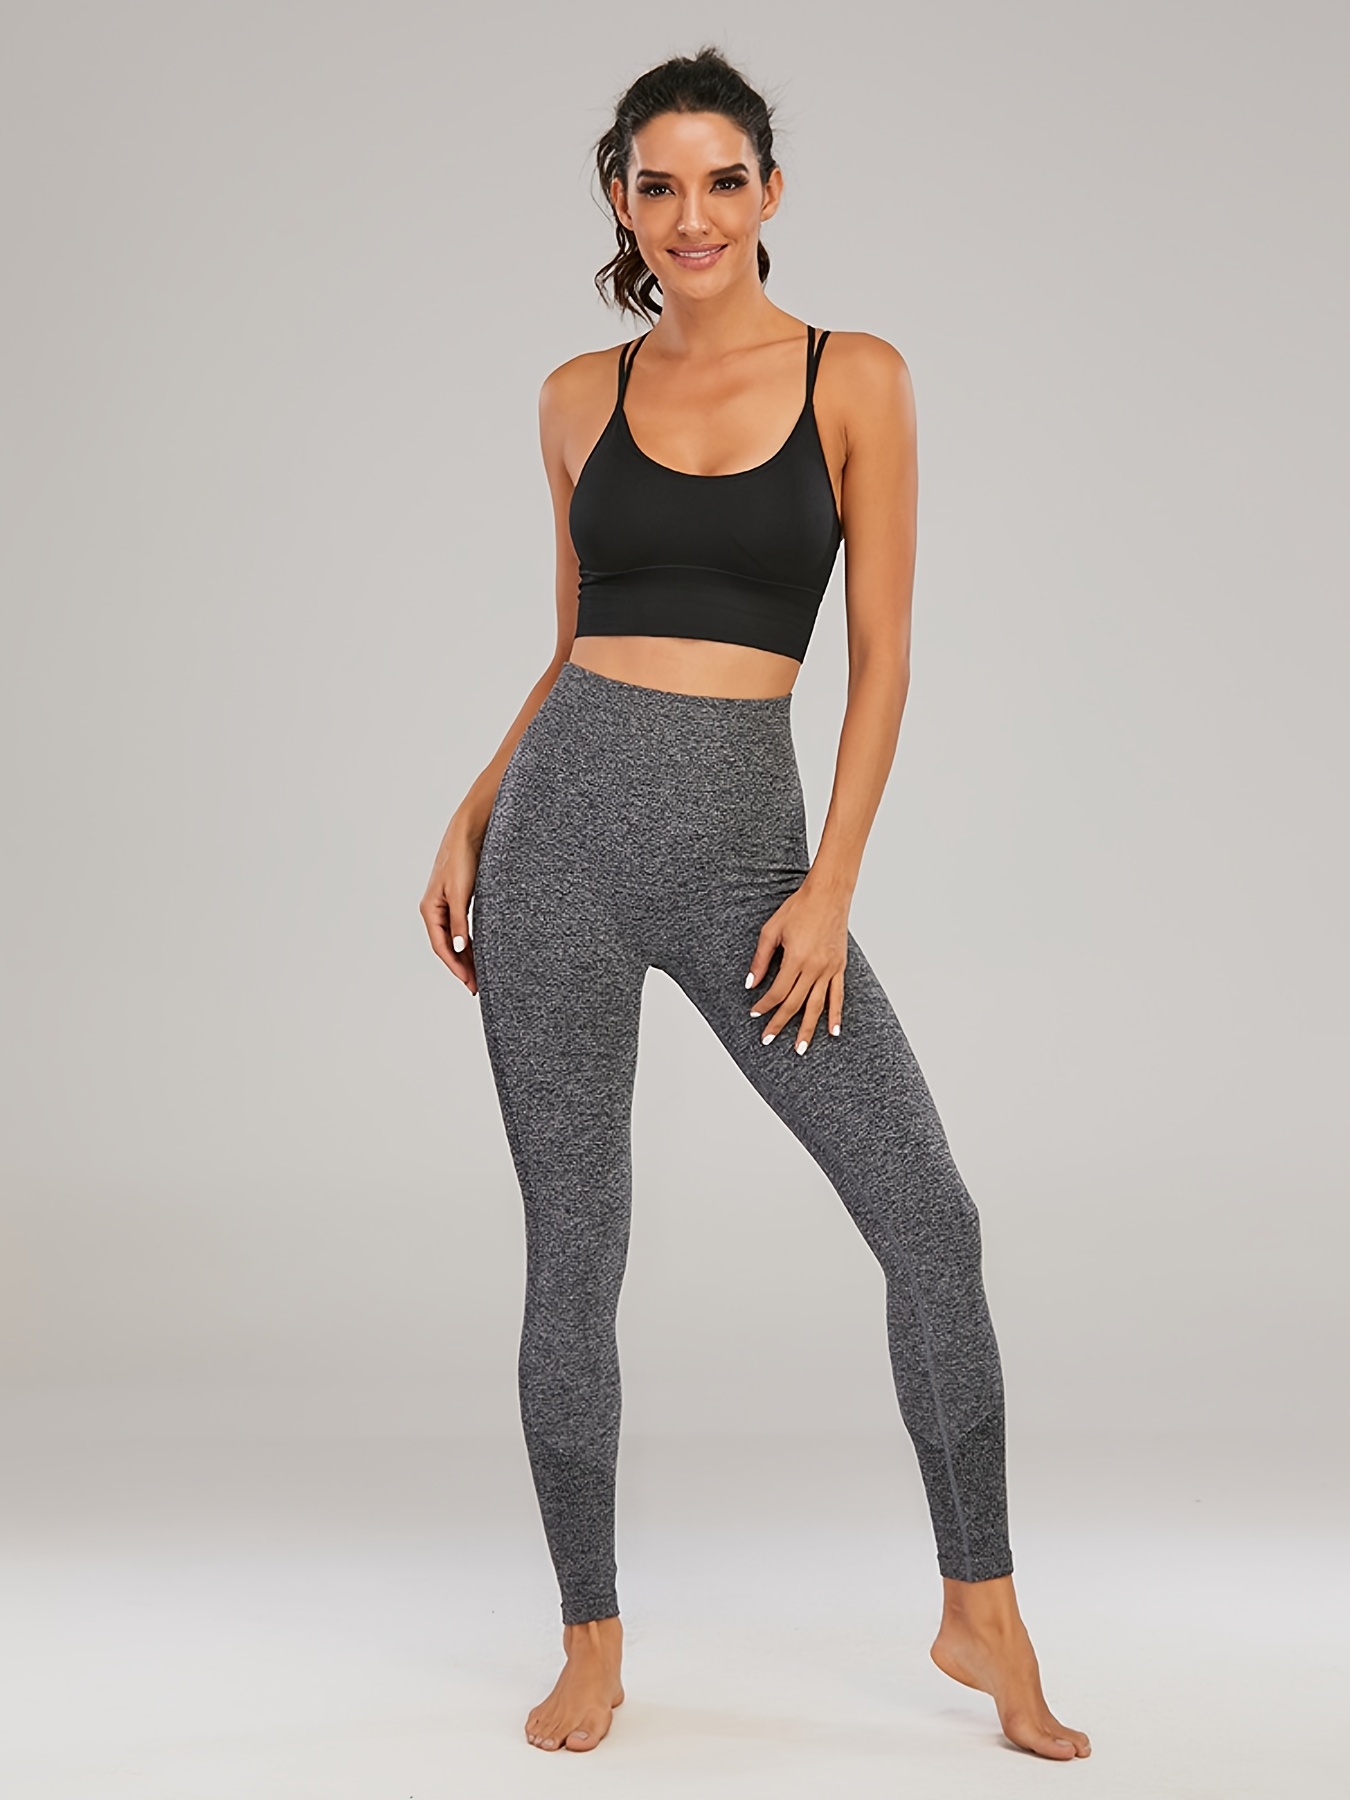 JJ yyds Seamless Leggings Womens Butt' Lift Curves Workout Tights